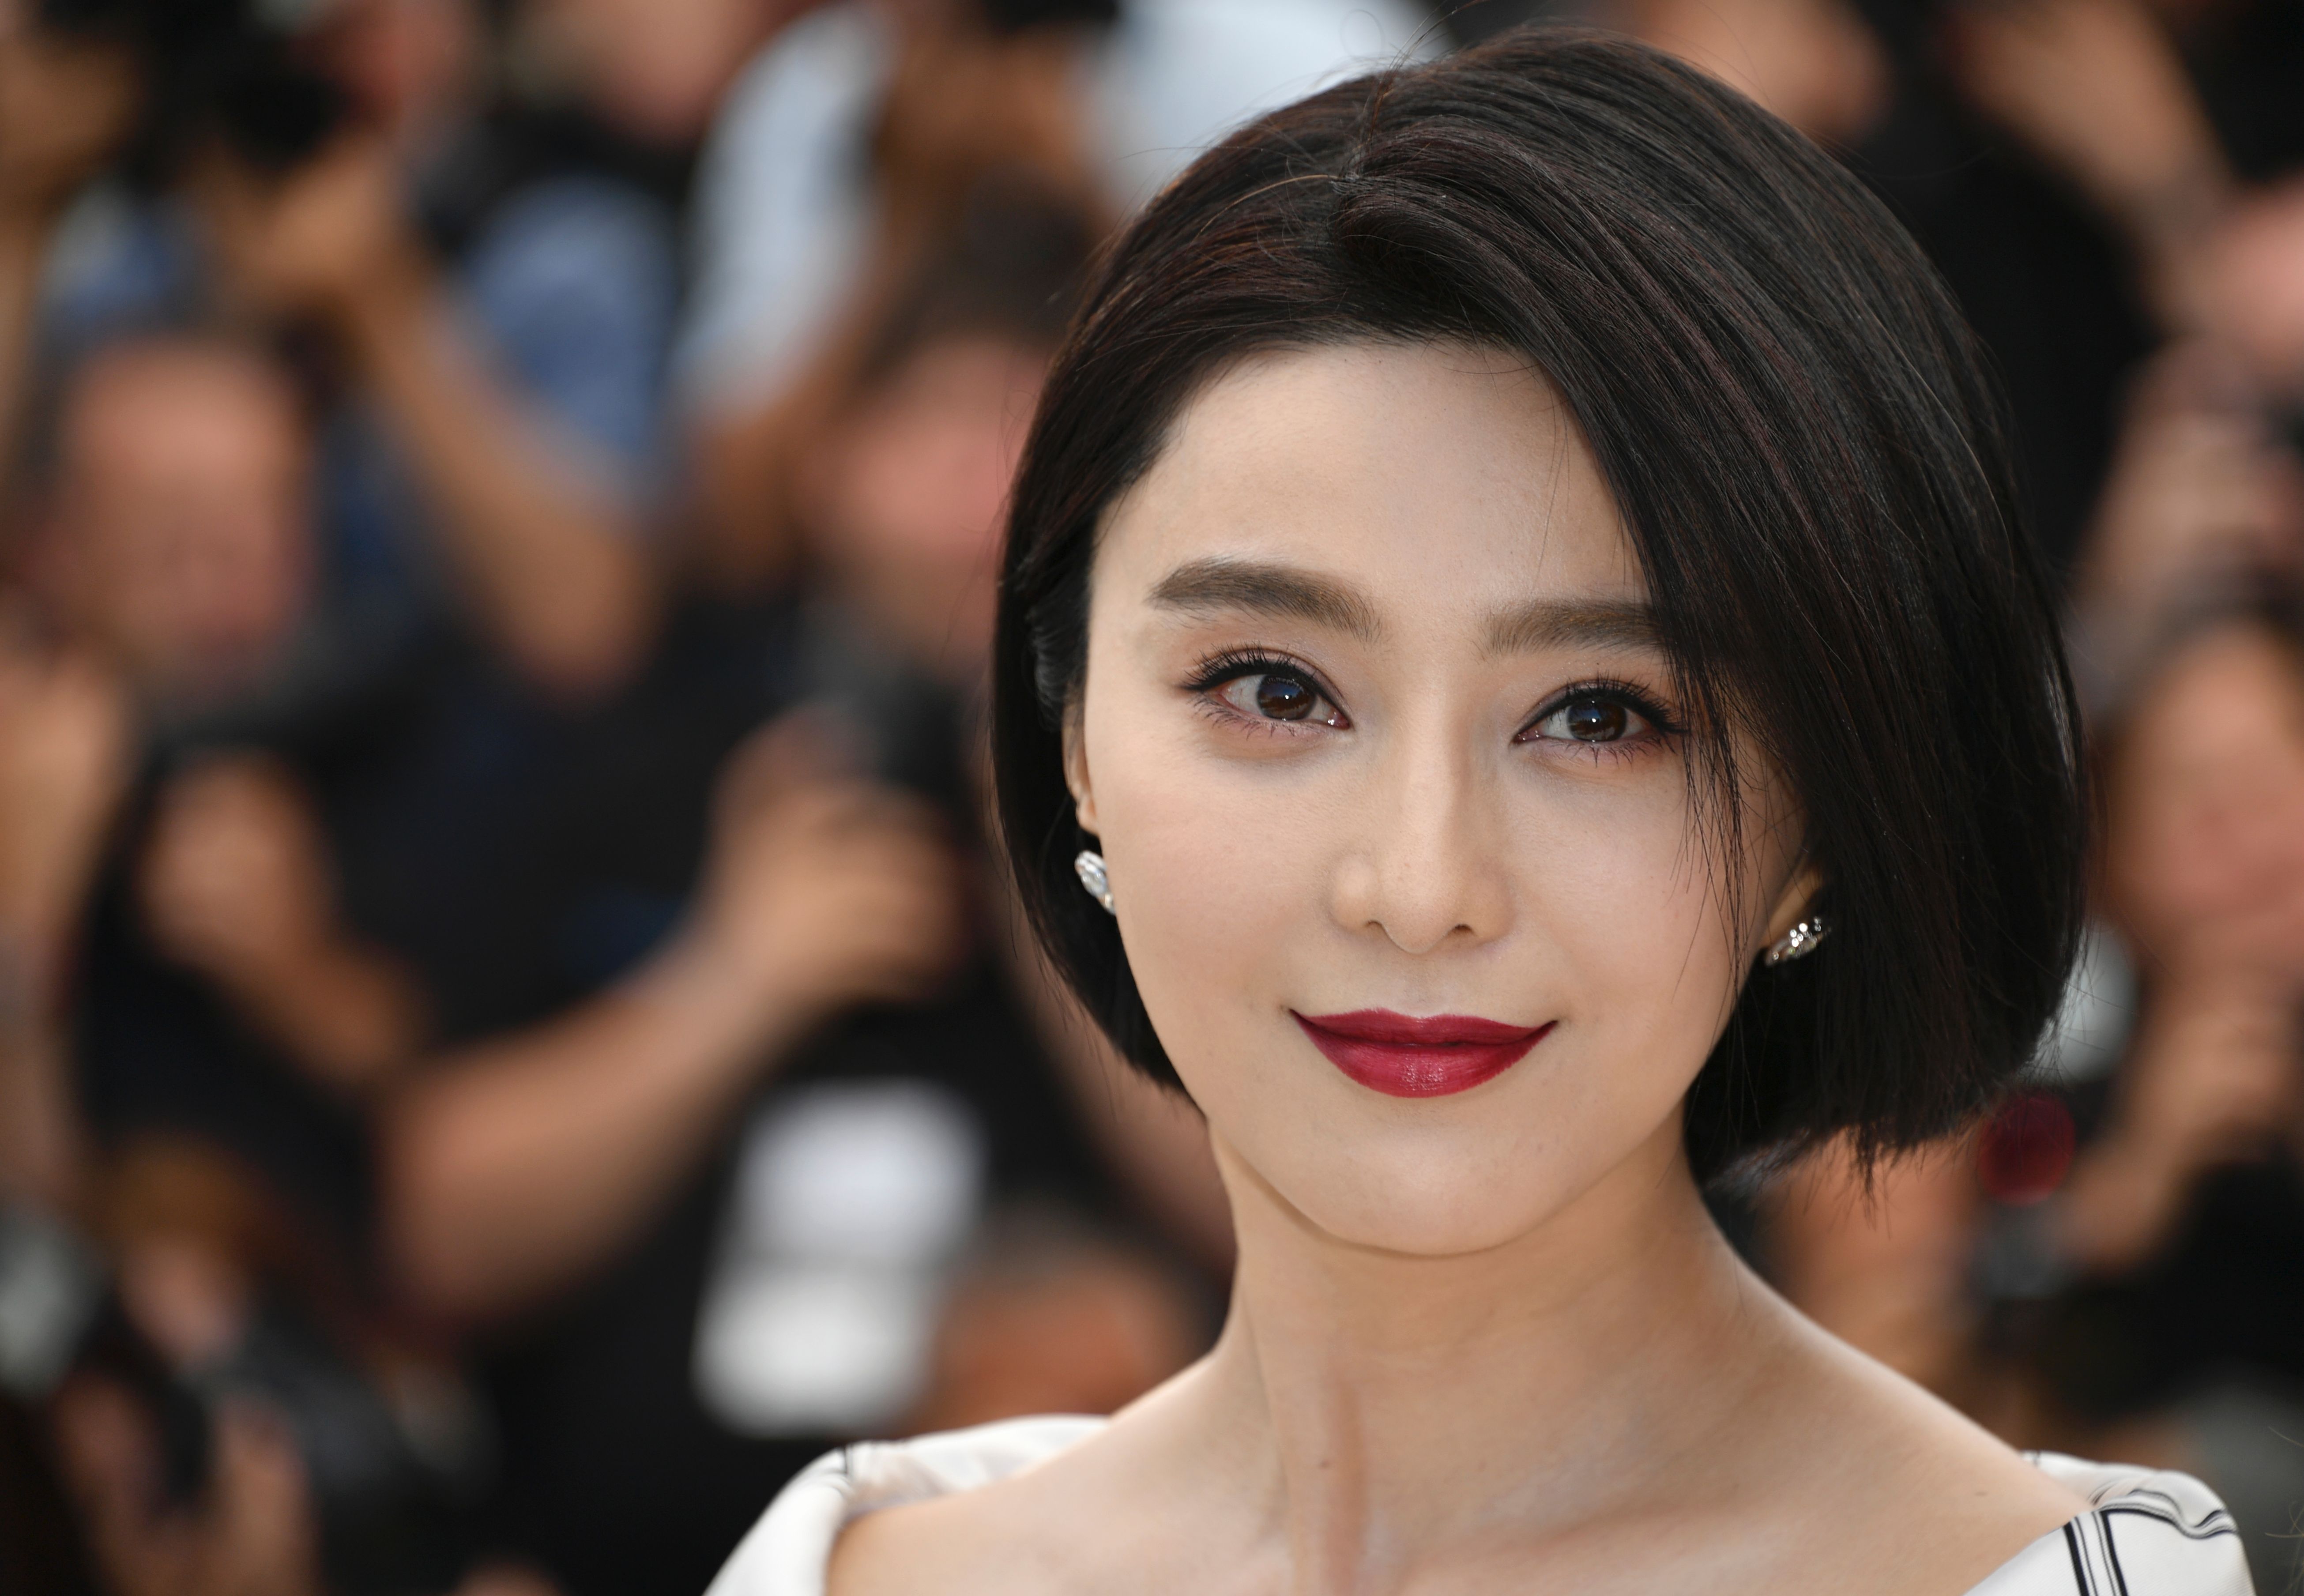 Chinese actress and member of the Feature Film jury Fan Bingbing poses on May 17, 2017 during a photocall ahead of the opening ceremony of the 70th edition of the Cannes Film Festival in Cannes, southern France. / AFP PHOTO / LOIC VENANCE (Photo credit should read LOIC VENANCE/AFP/Getty Images)